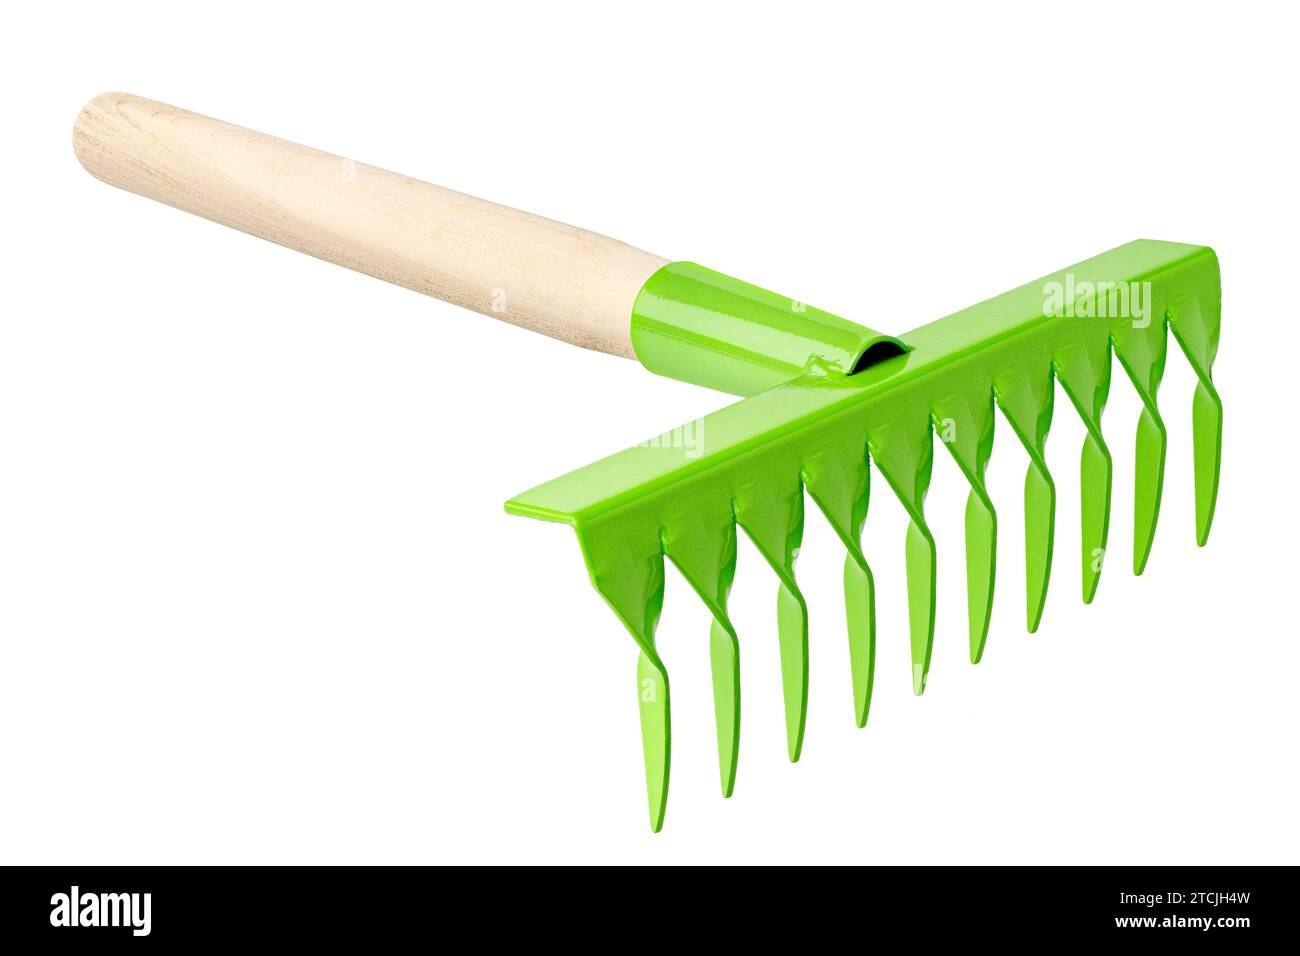 Green metal rake with wooden handle, garden tool, isolated on white background Stock Photo